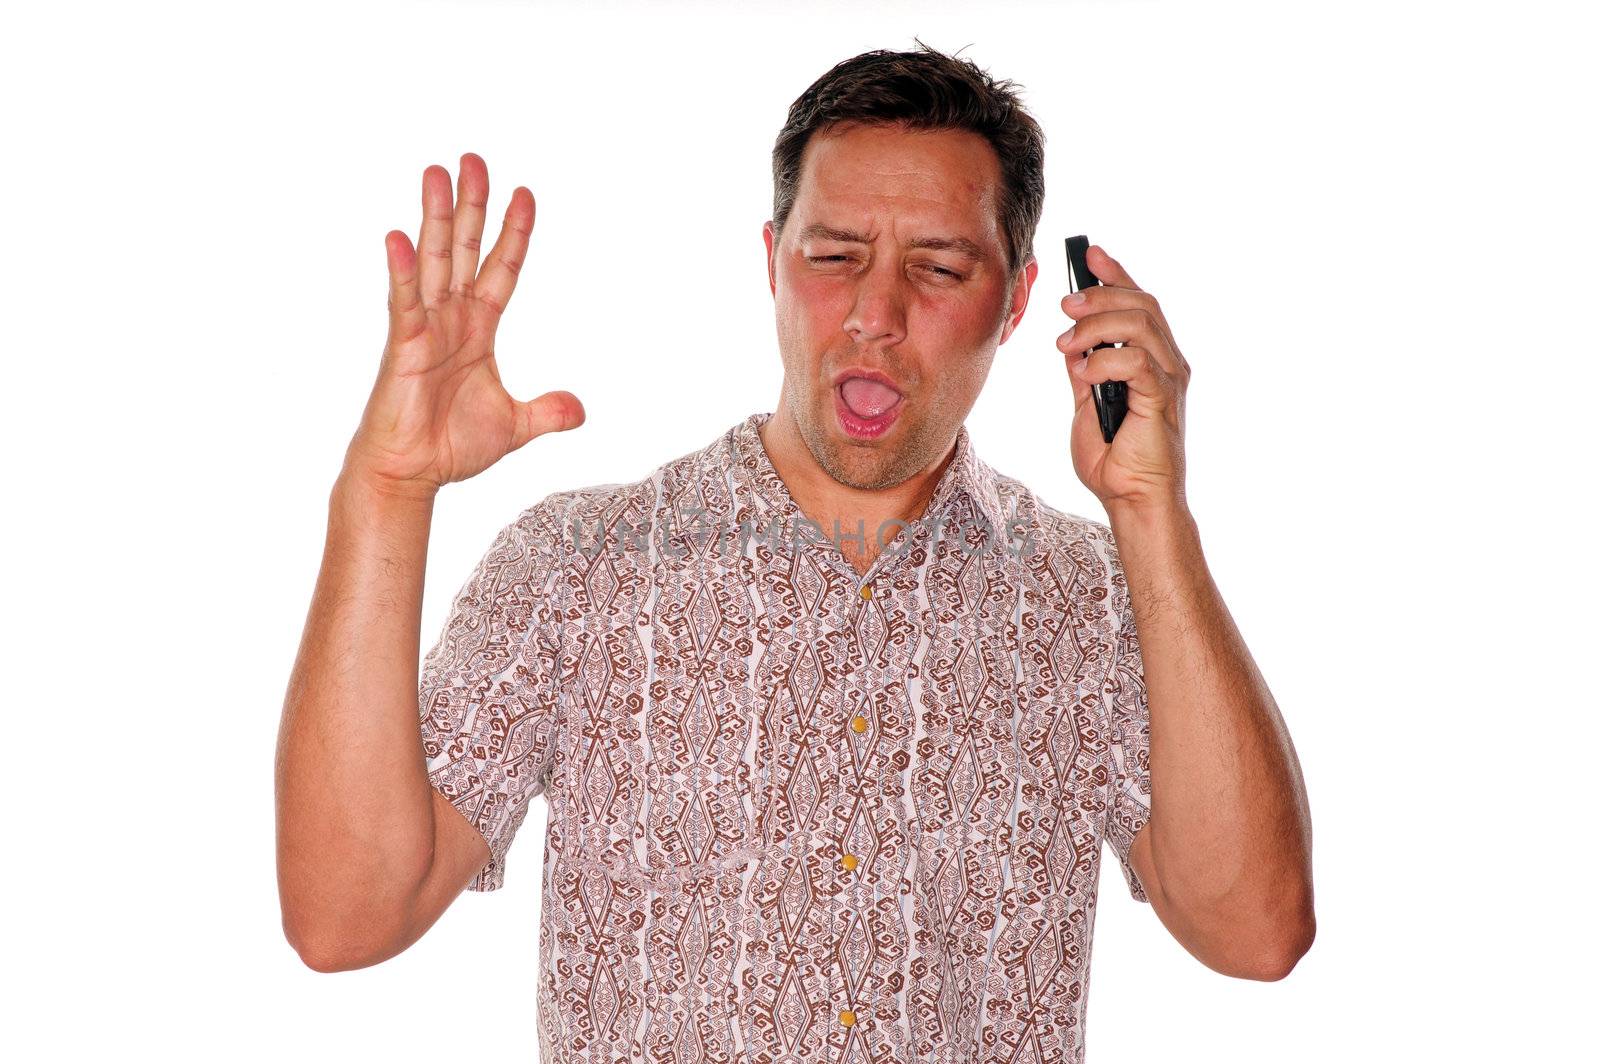 Angry young man yelling at phone in annoying phone conversation